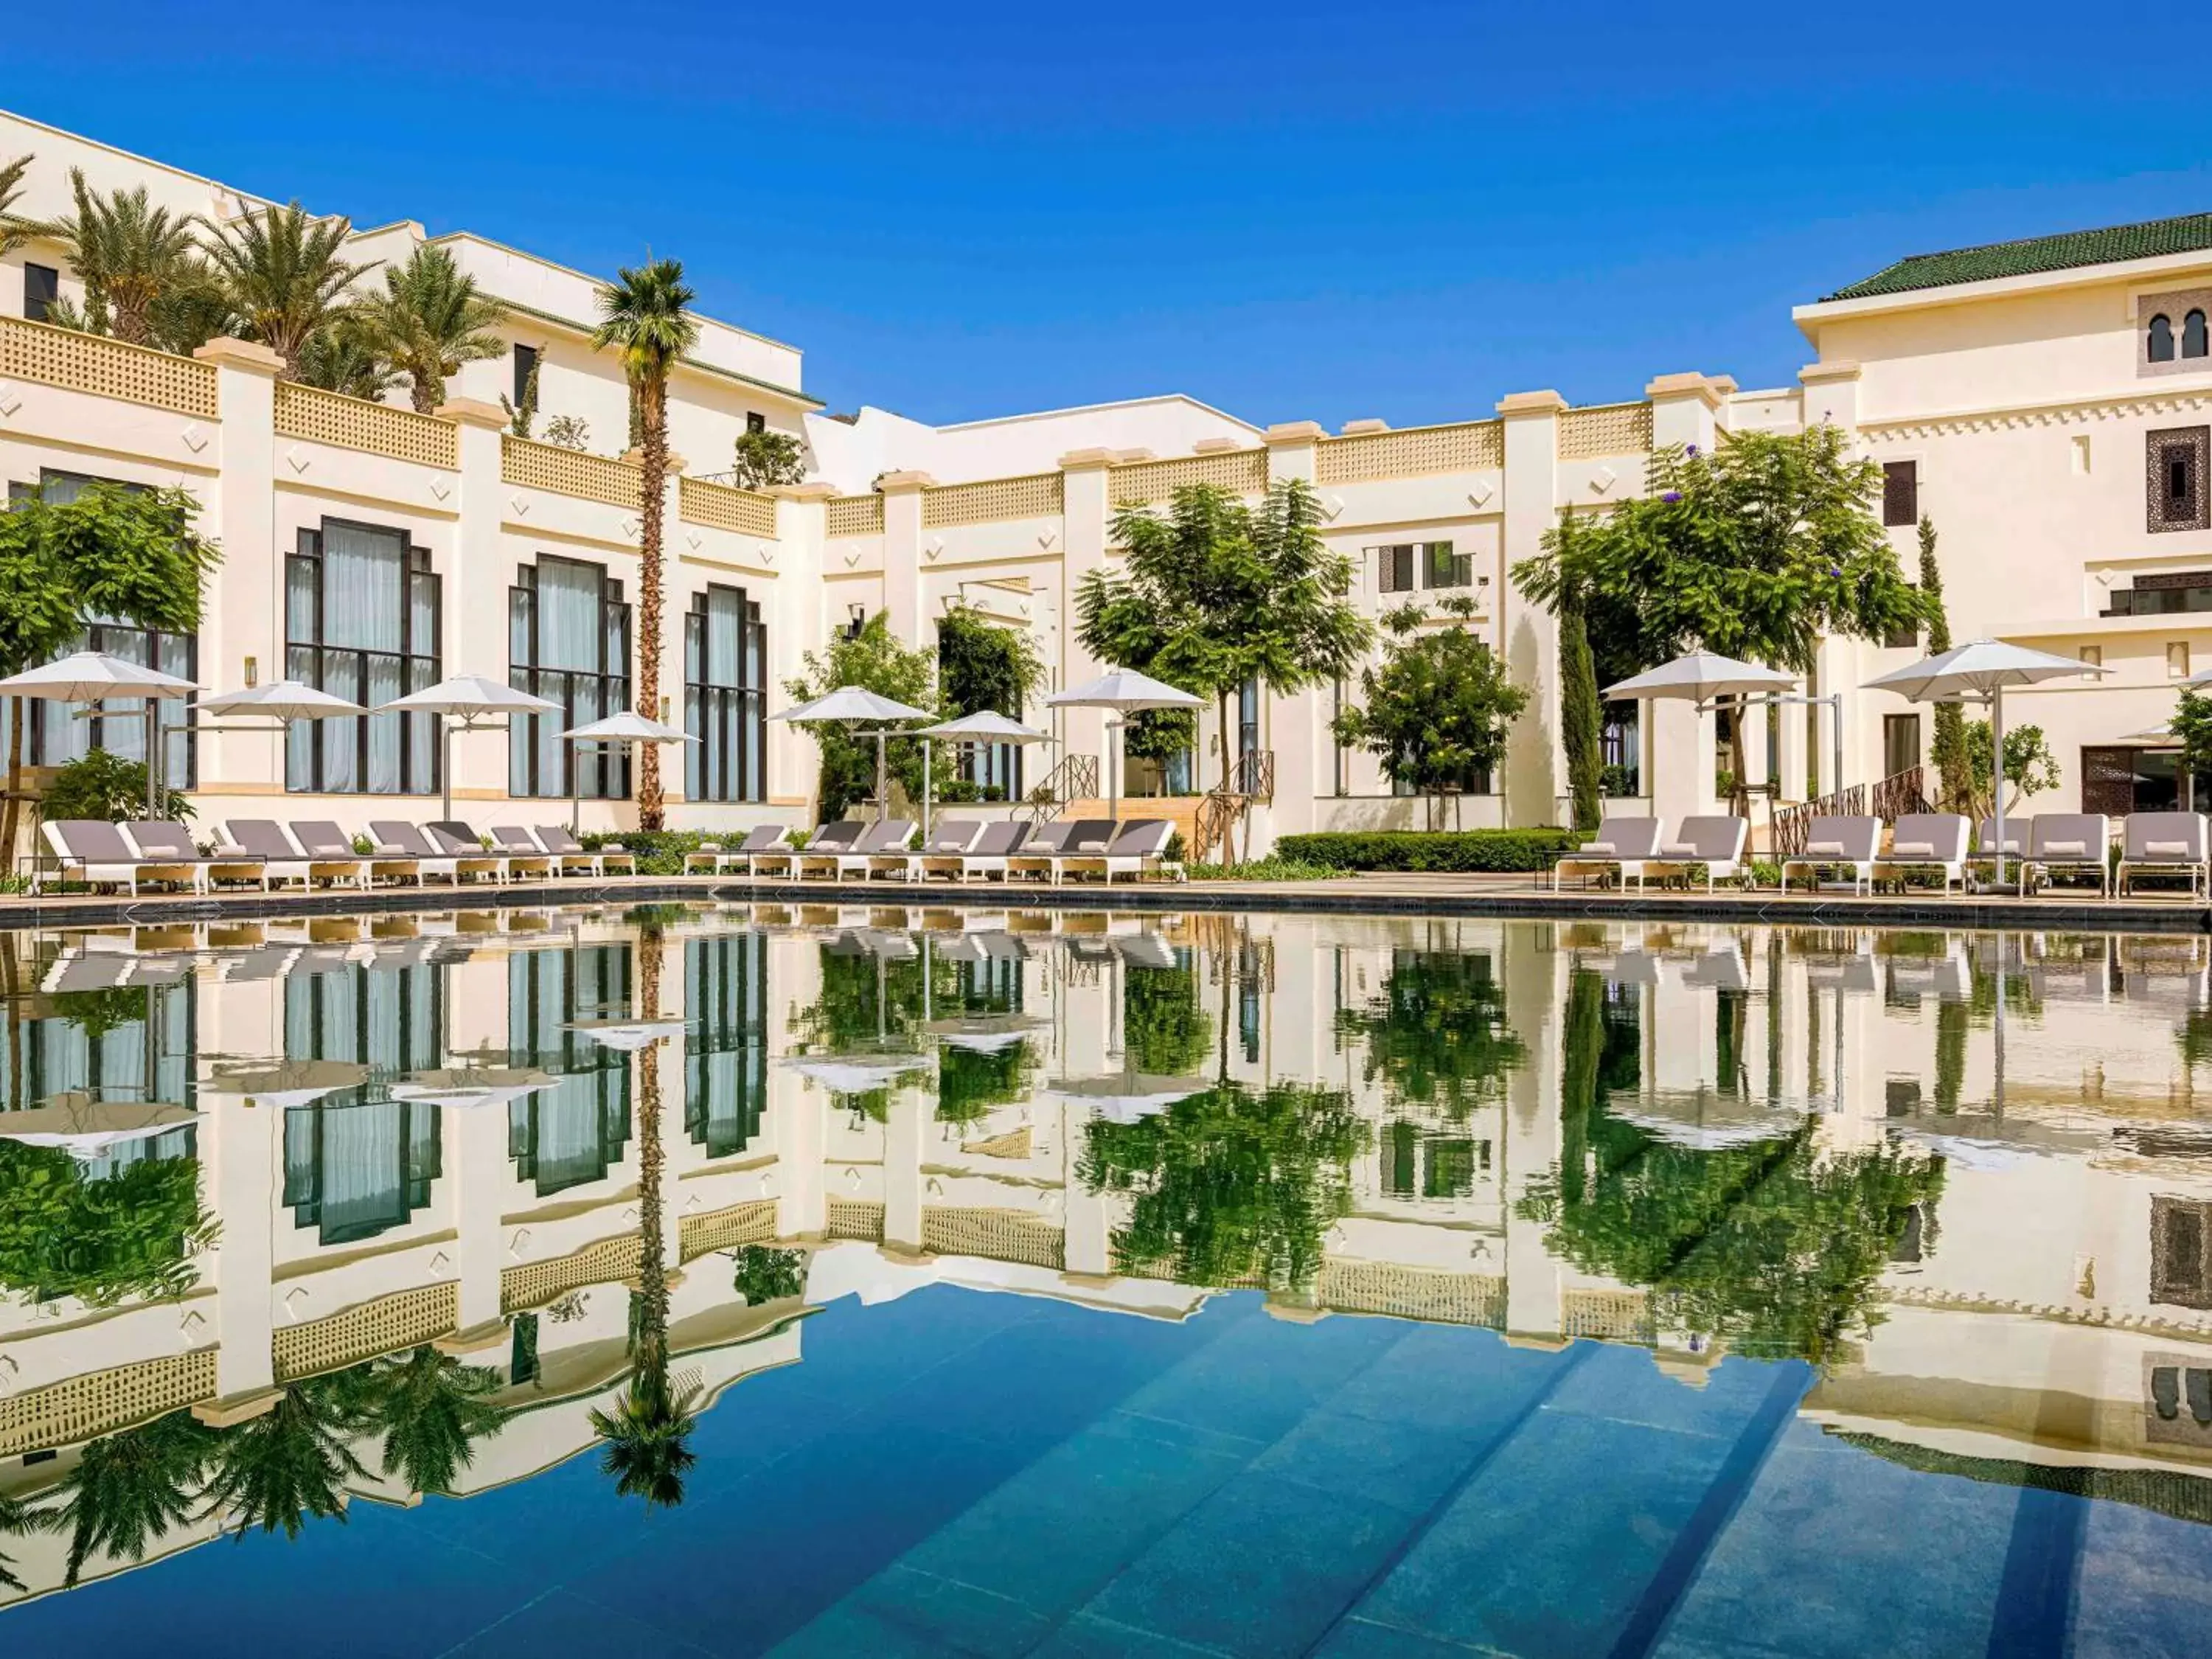 Property building, Swimming Pool in Fairmont Tazi Palace Tangier